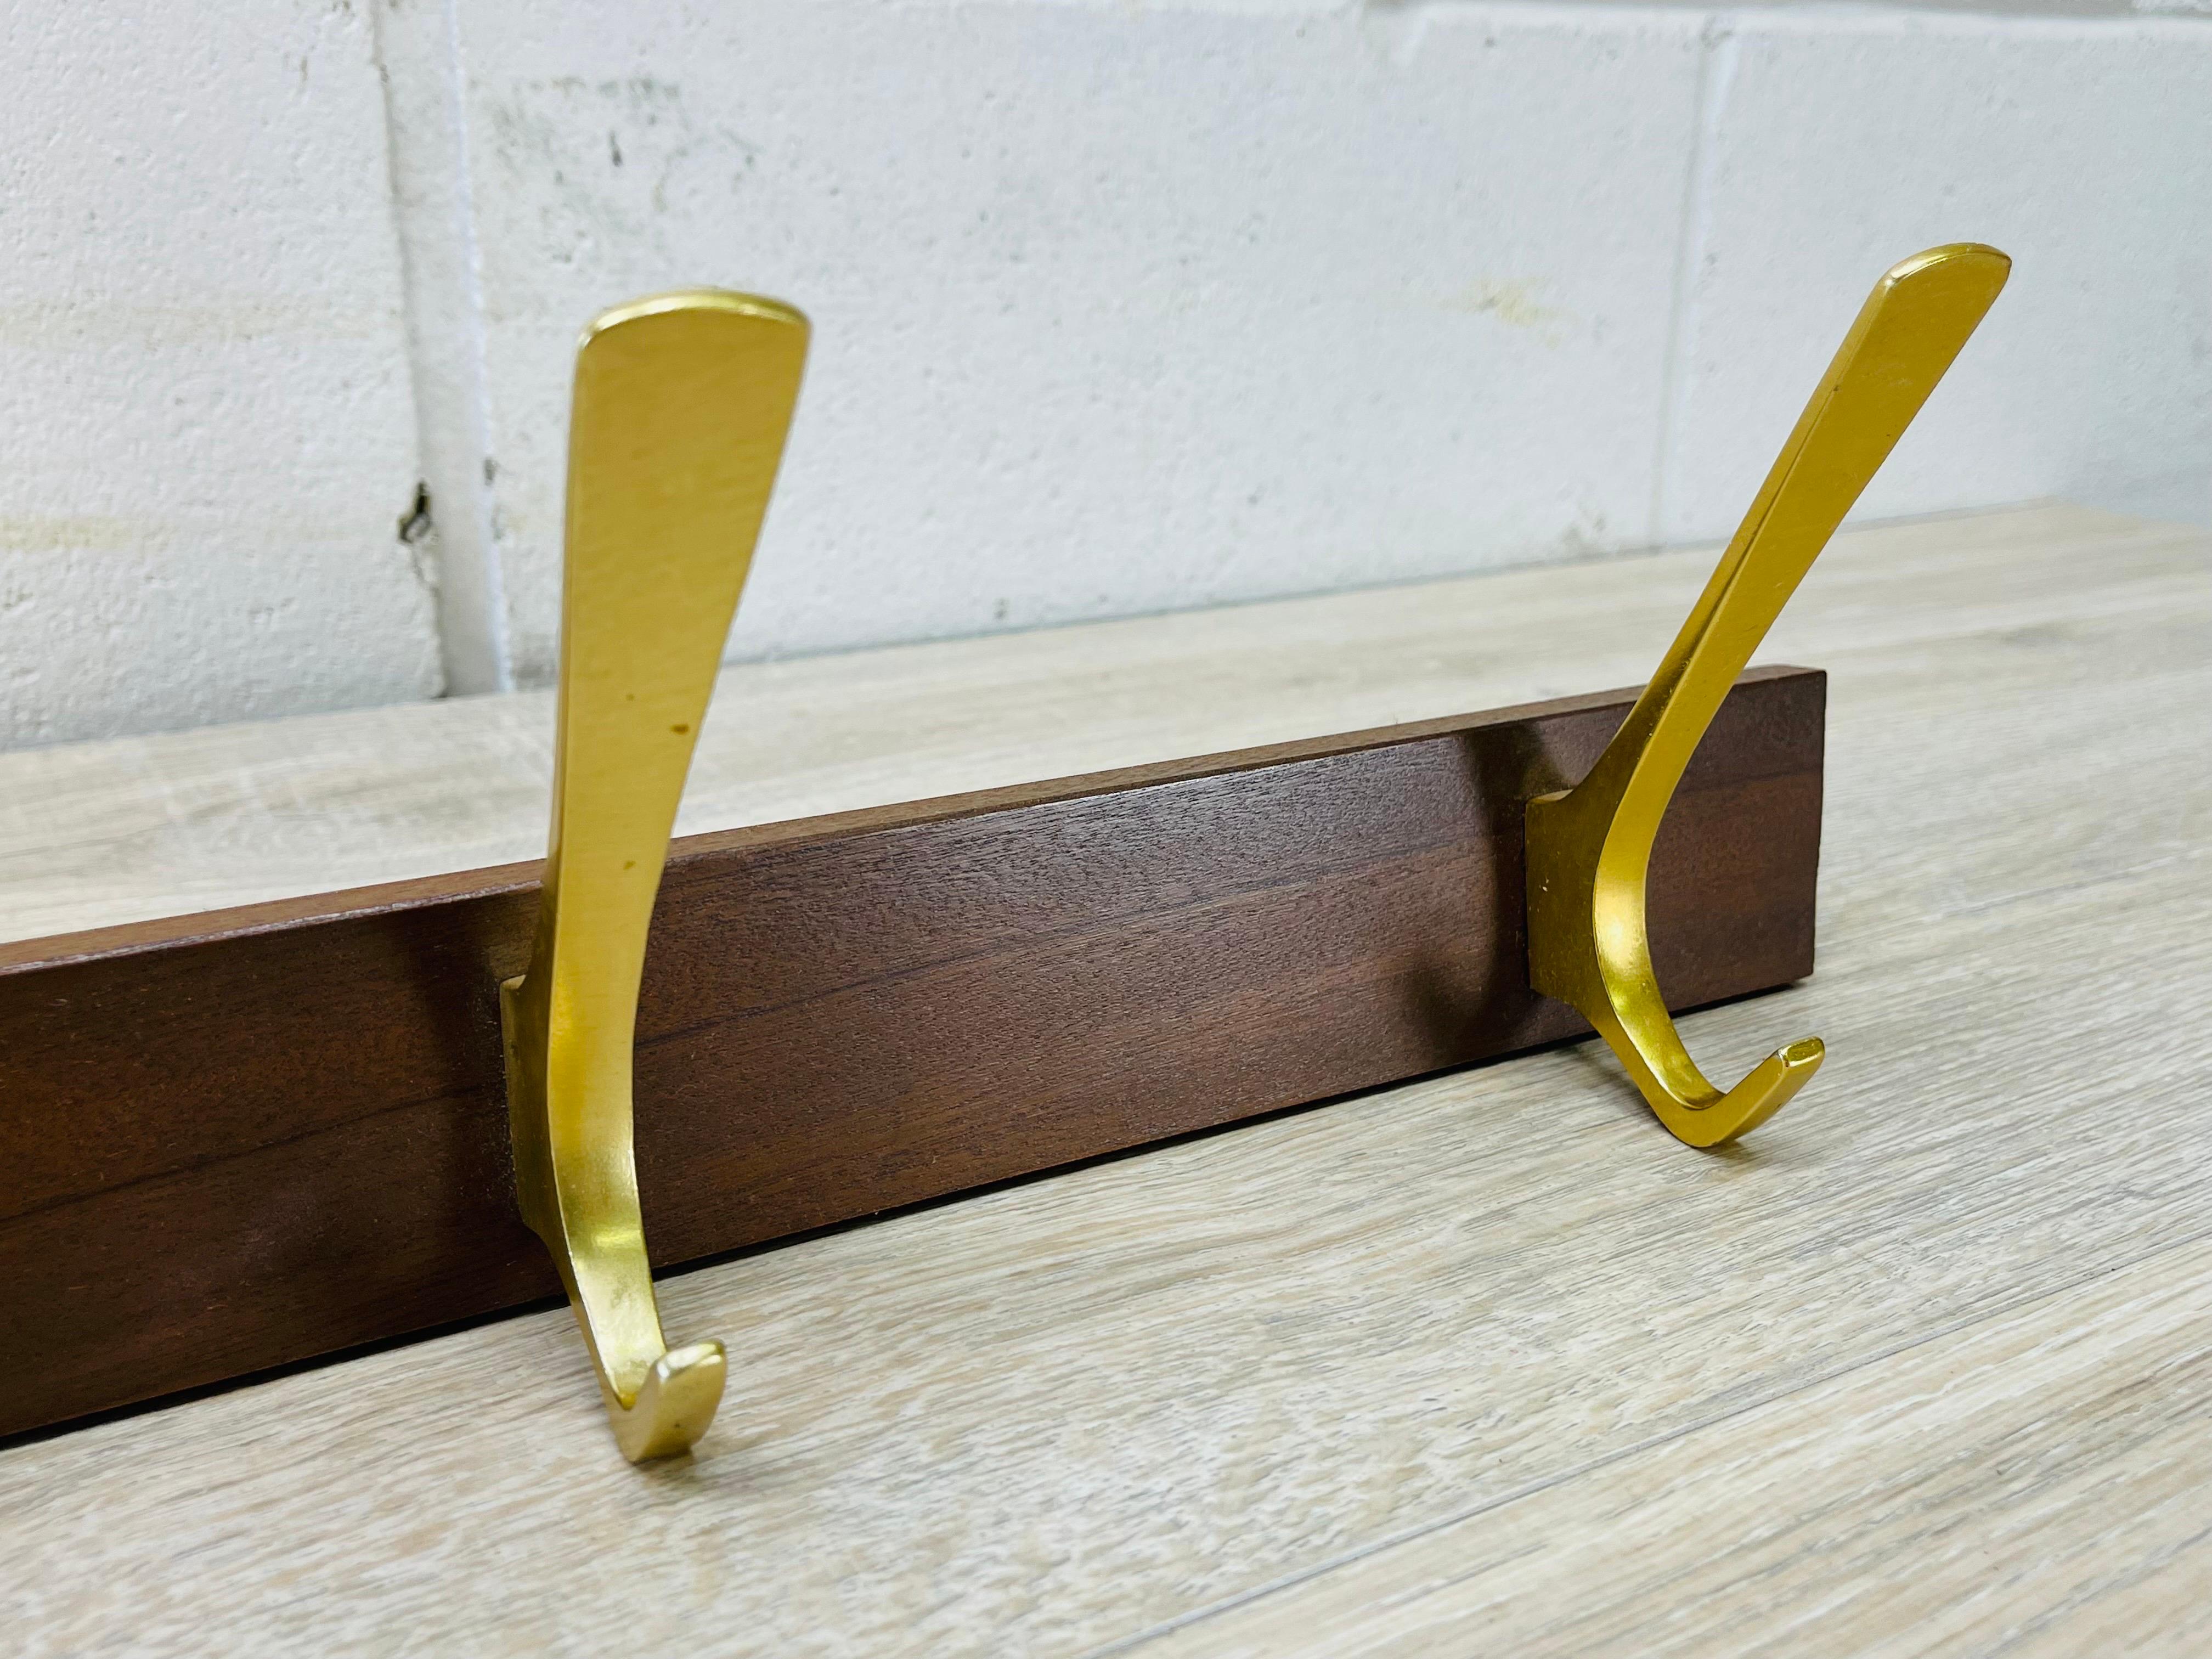 1950s Hertha Baller Austria Wall Mounted 3-Hook Coat Rack In Good Condition For Sale In Amherst, NH